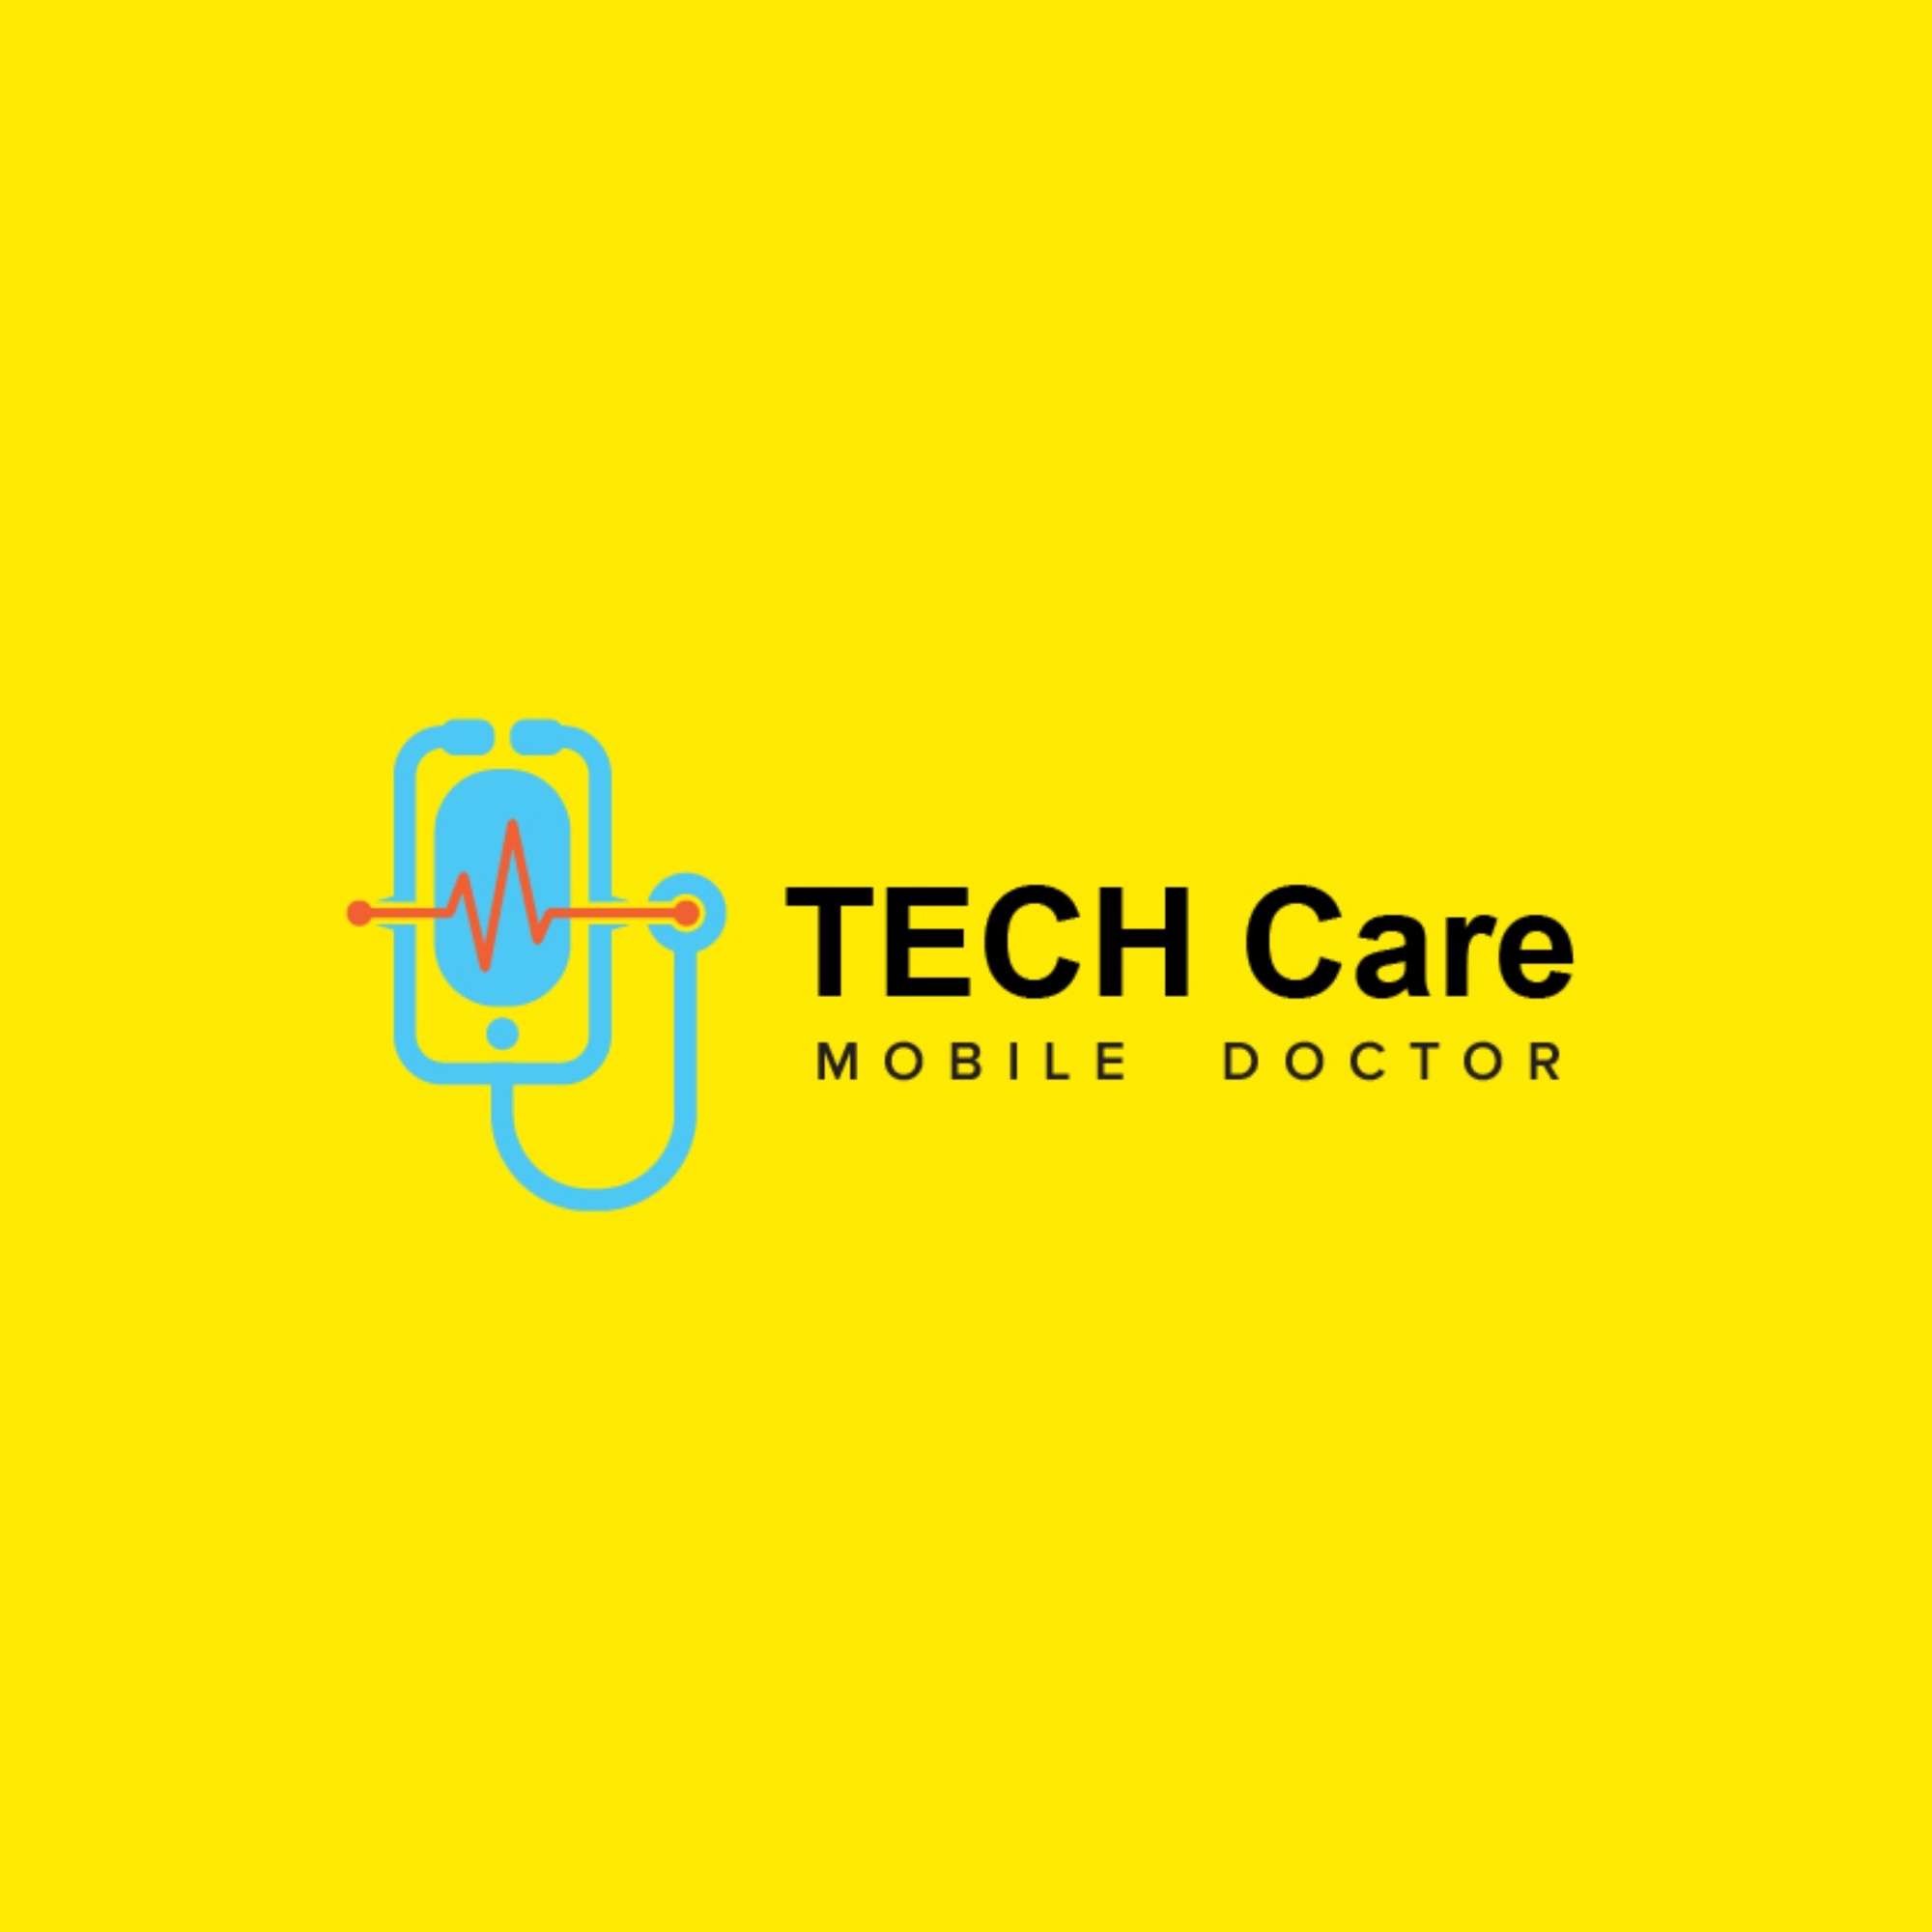 TECHNICAL CARE TRADING AND SERVICES